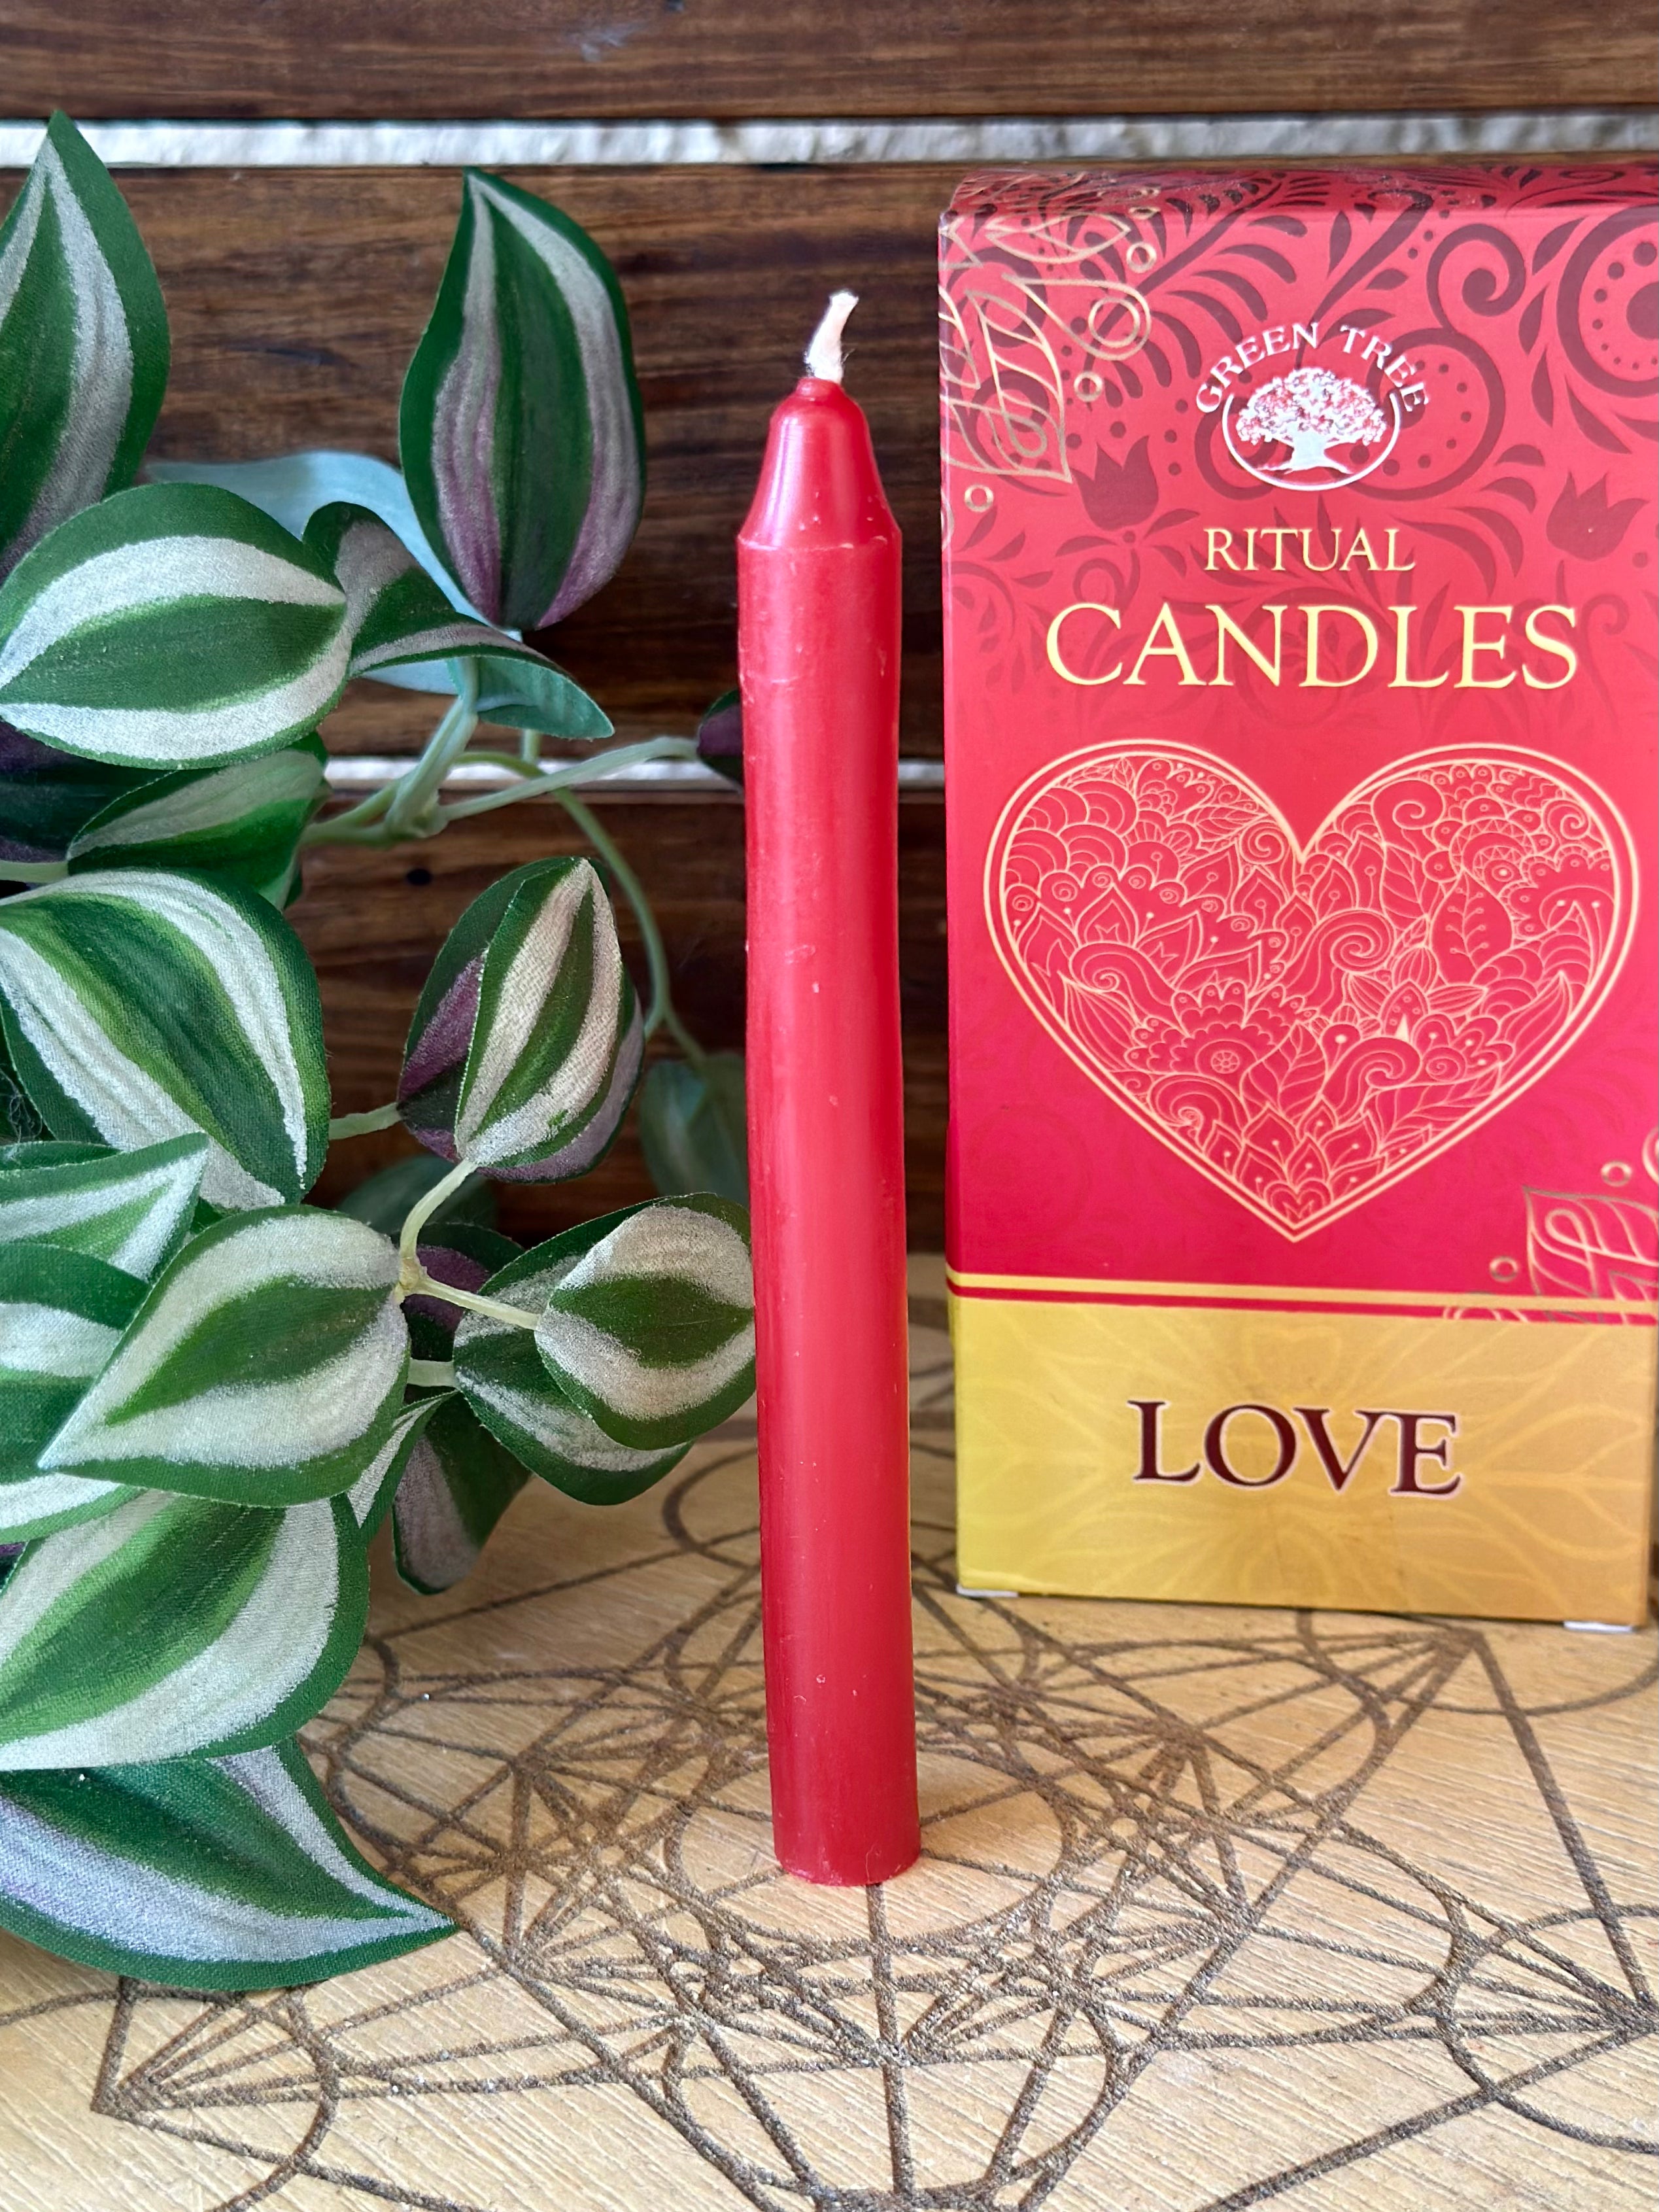 Love Ritual Candles Love - Muse Crystals & Mystical Gifts